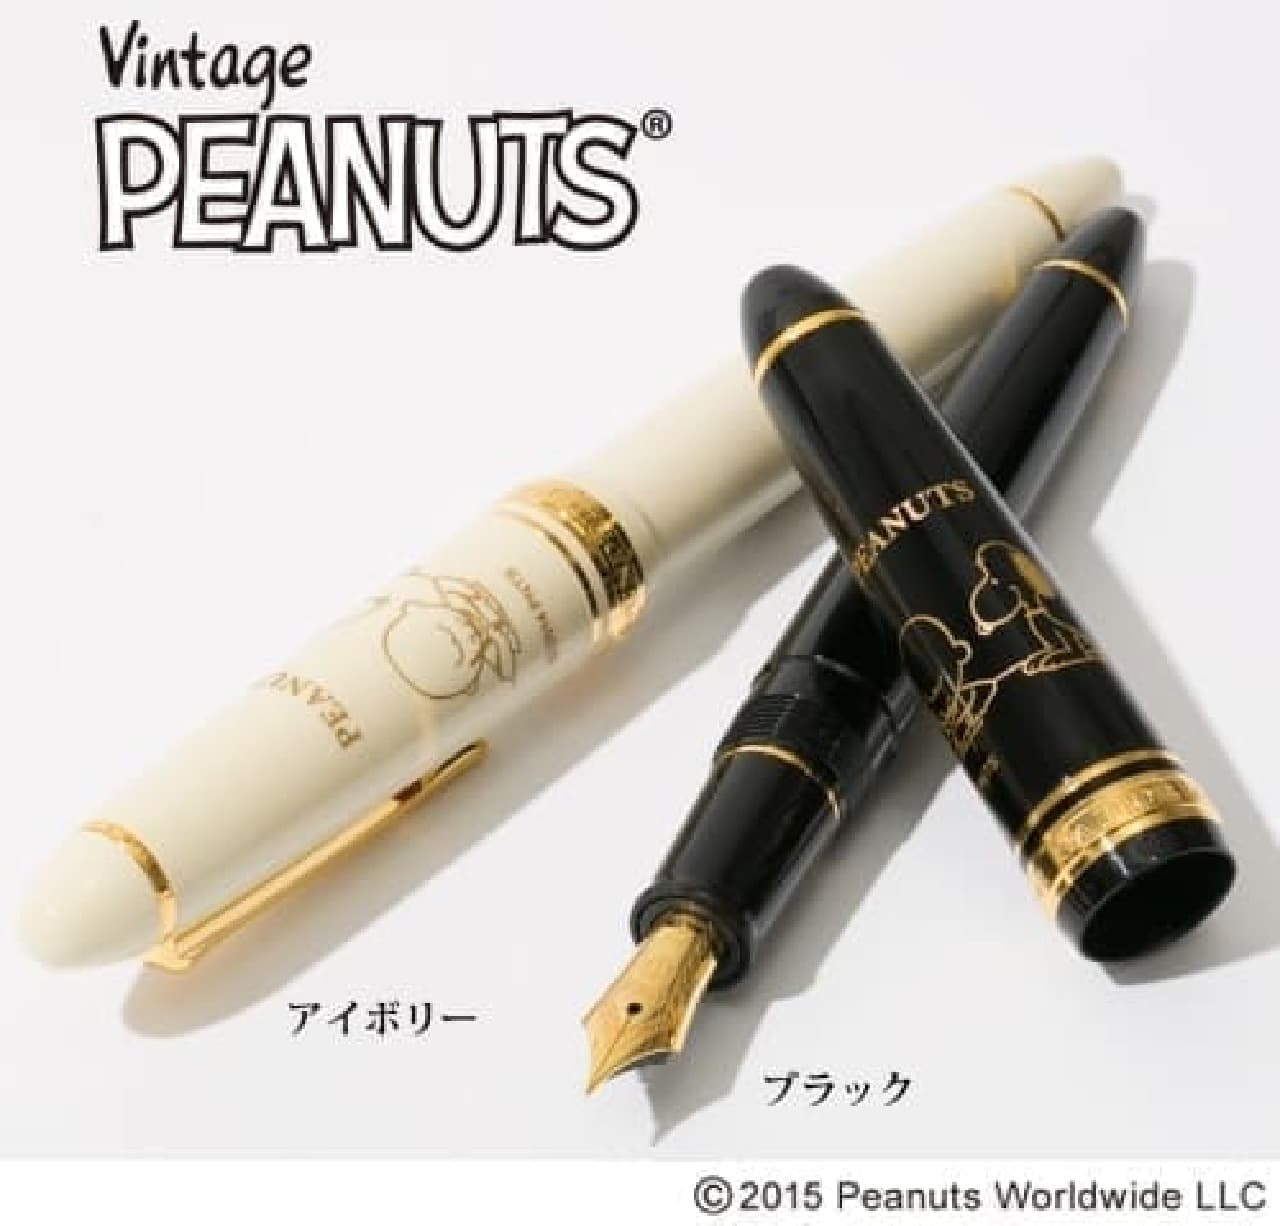 A lovely fountain pen that makes you want to write a letter to someone